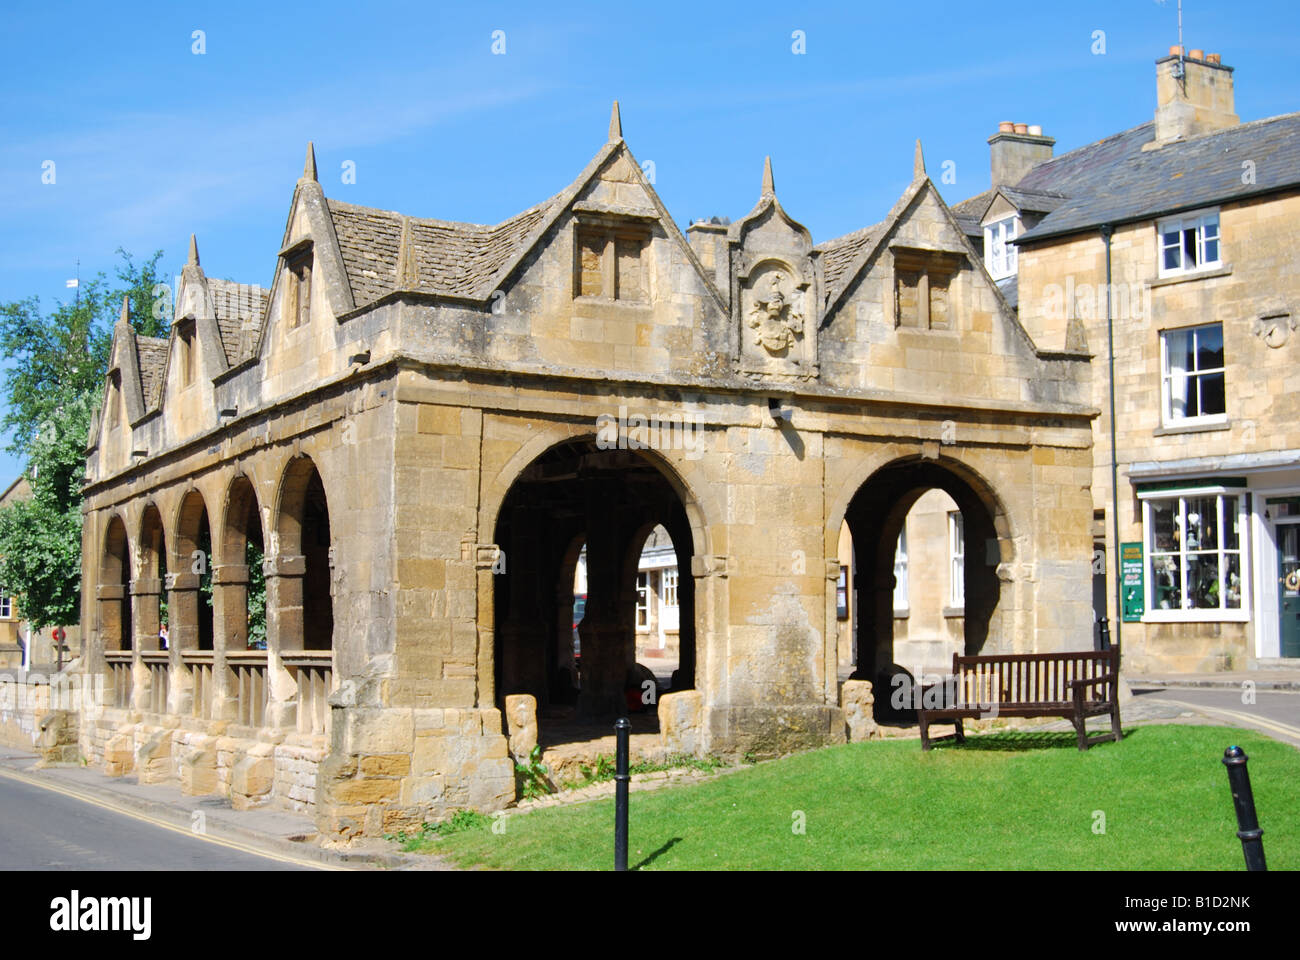 Marché médiéval Hall, High Street, Chipping Campden, Cotswolds, Gloucestershire, Angleterre, Royaume-Uni Banque D'Images